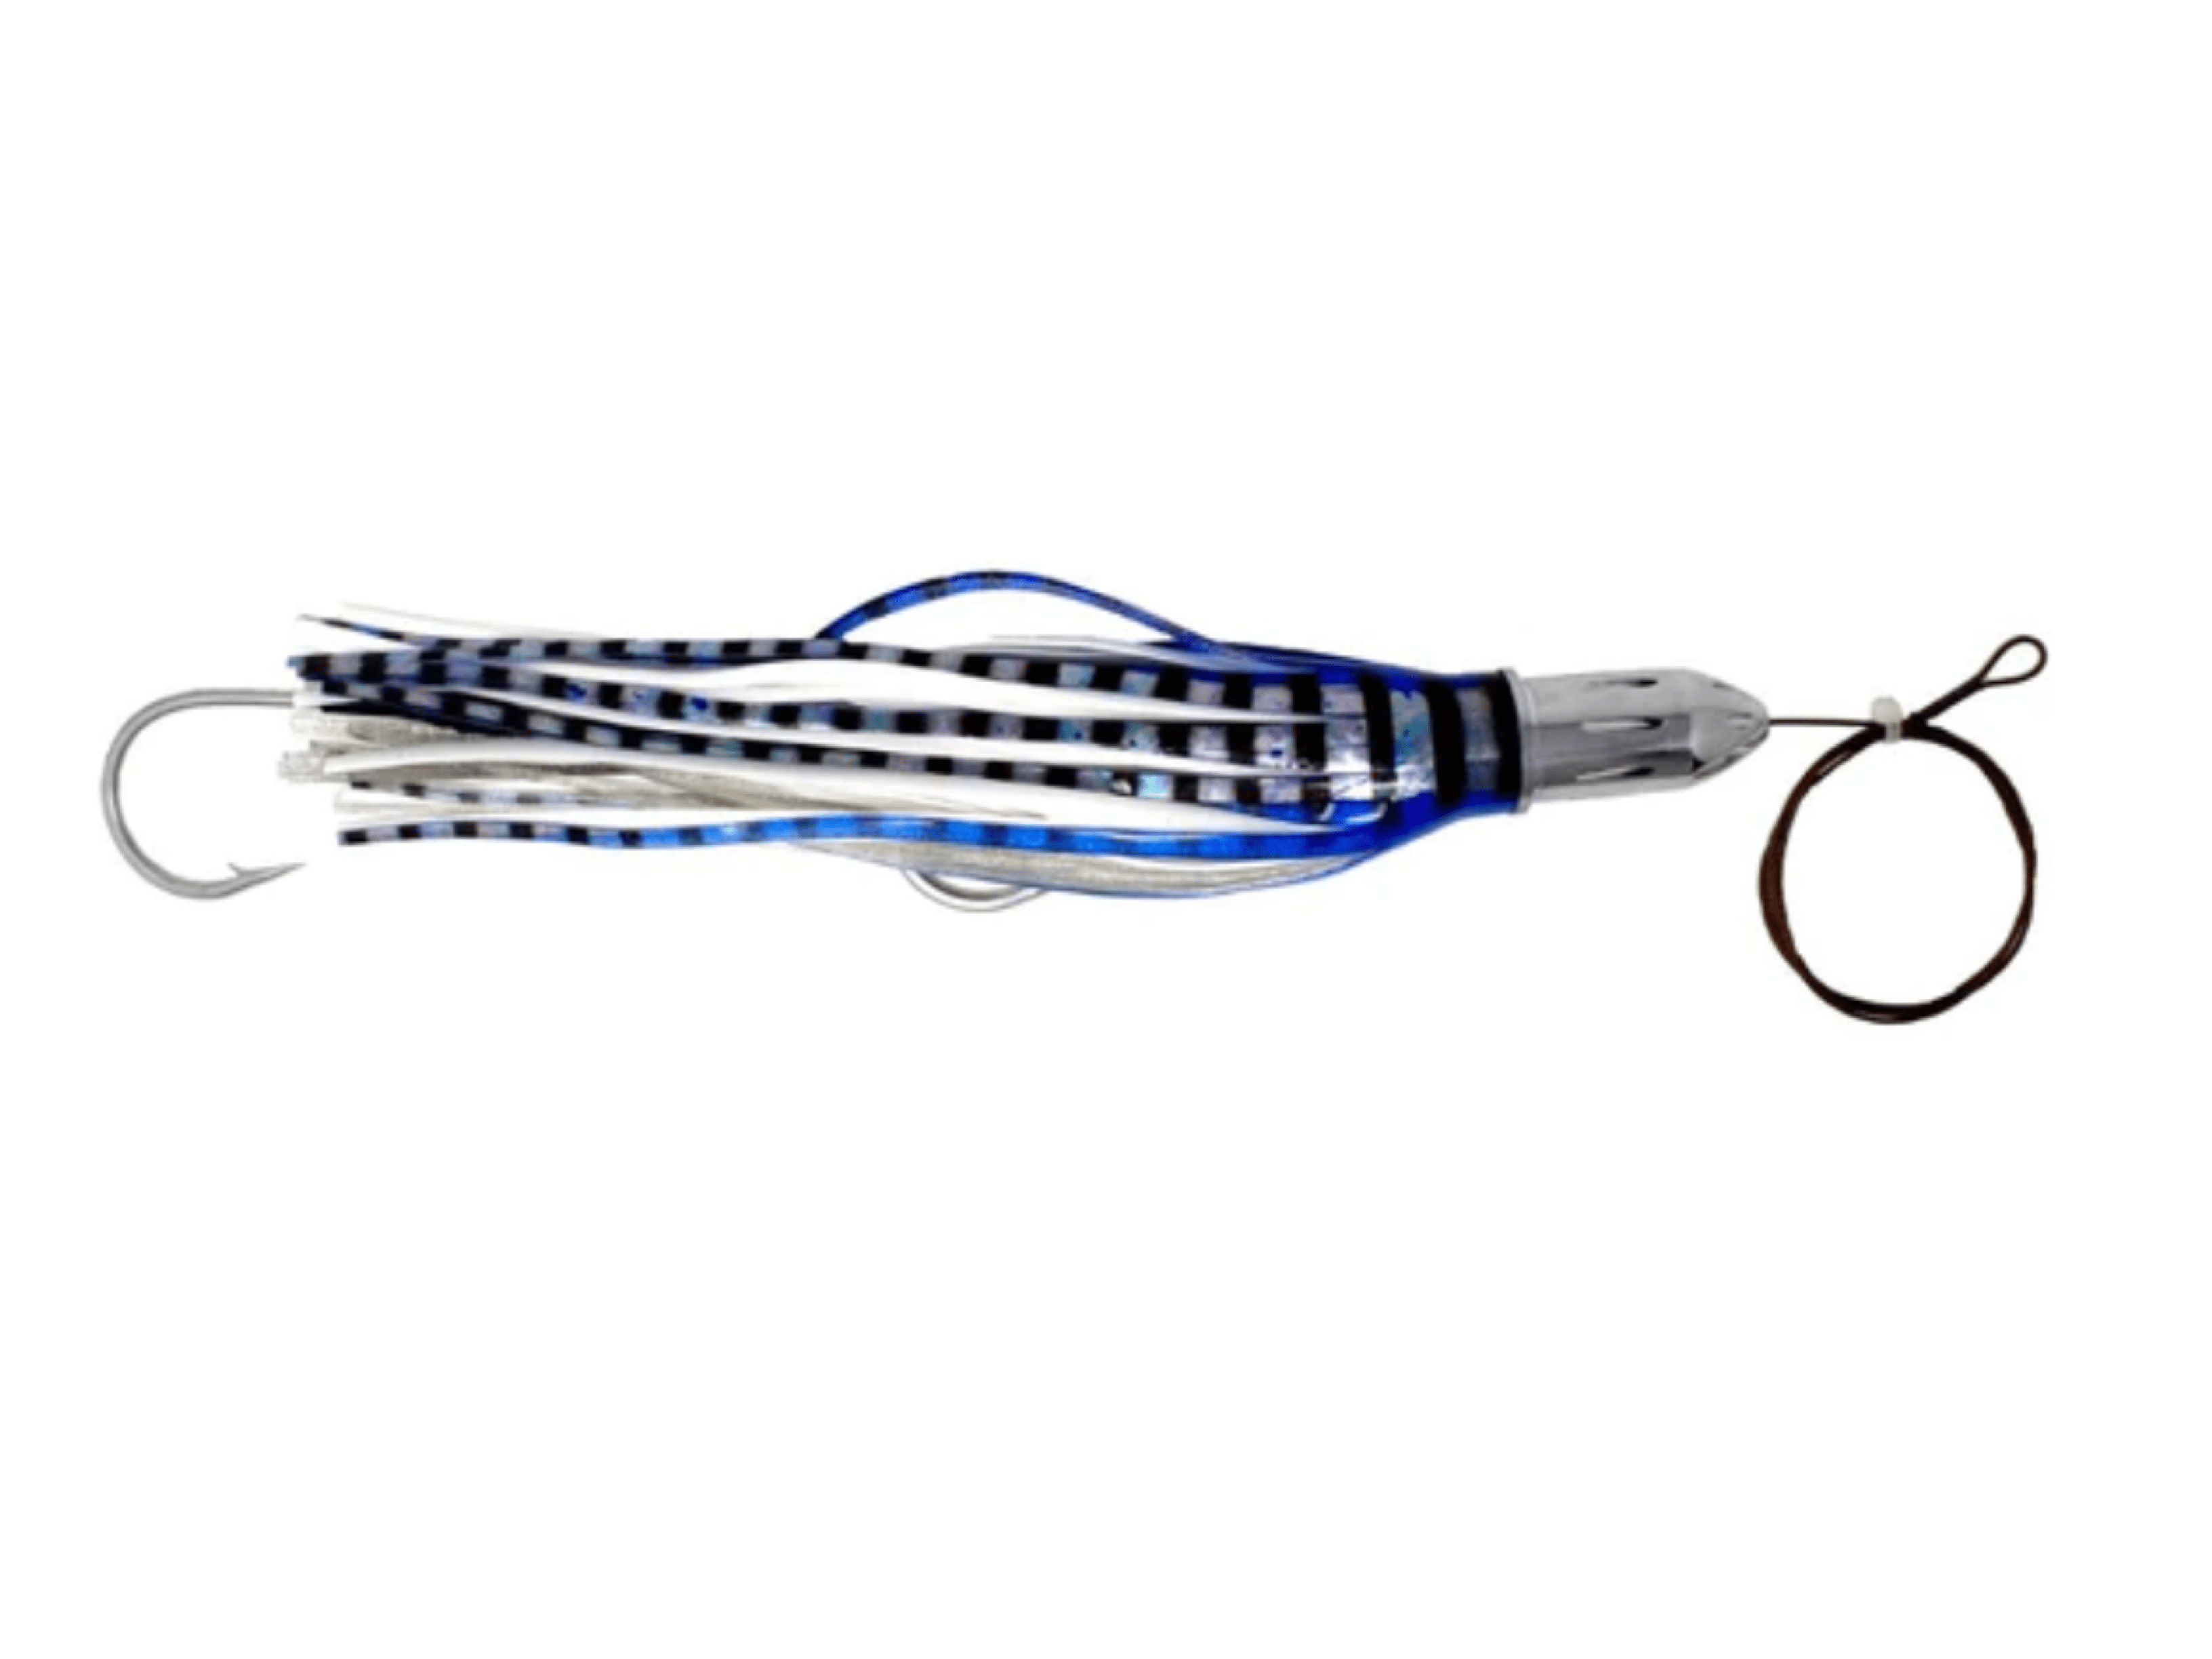 Stainless Series: A New Generation of Jet Head Lures